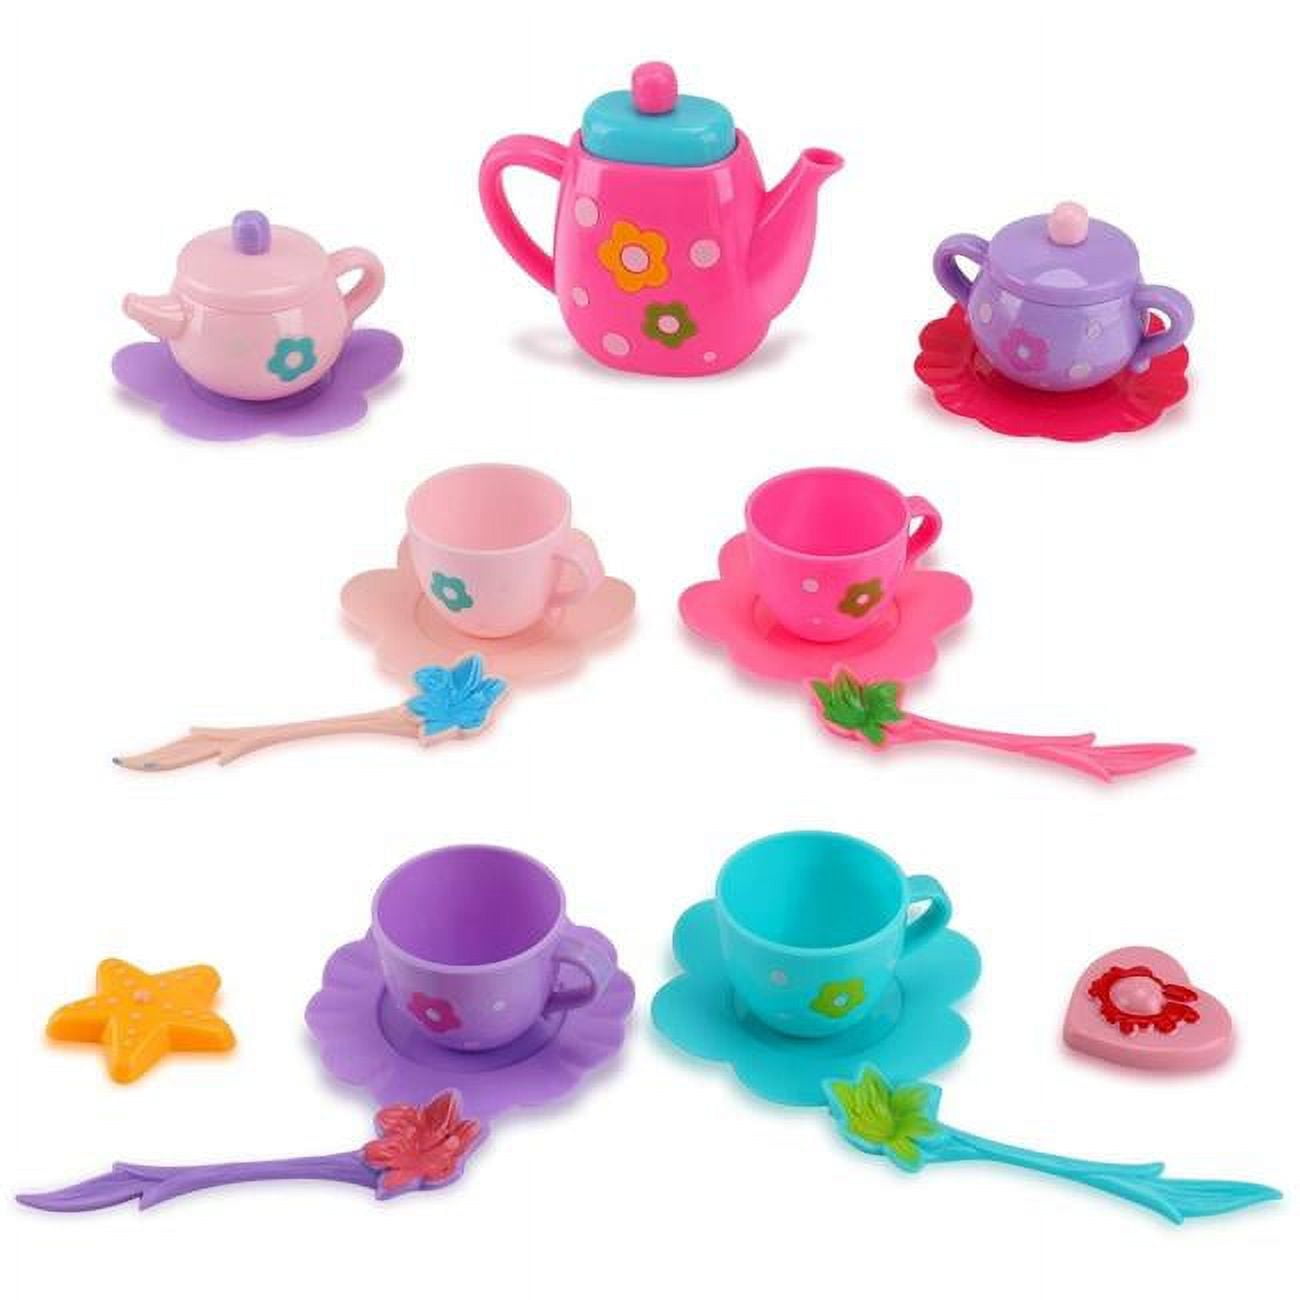 Picture of AZ Trading & Import PS7702 Royal Tea Party Playset - 21 Piece